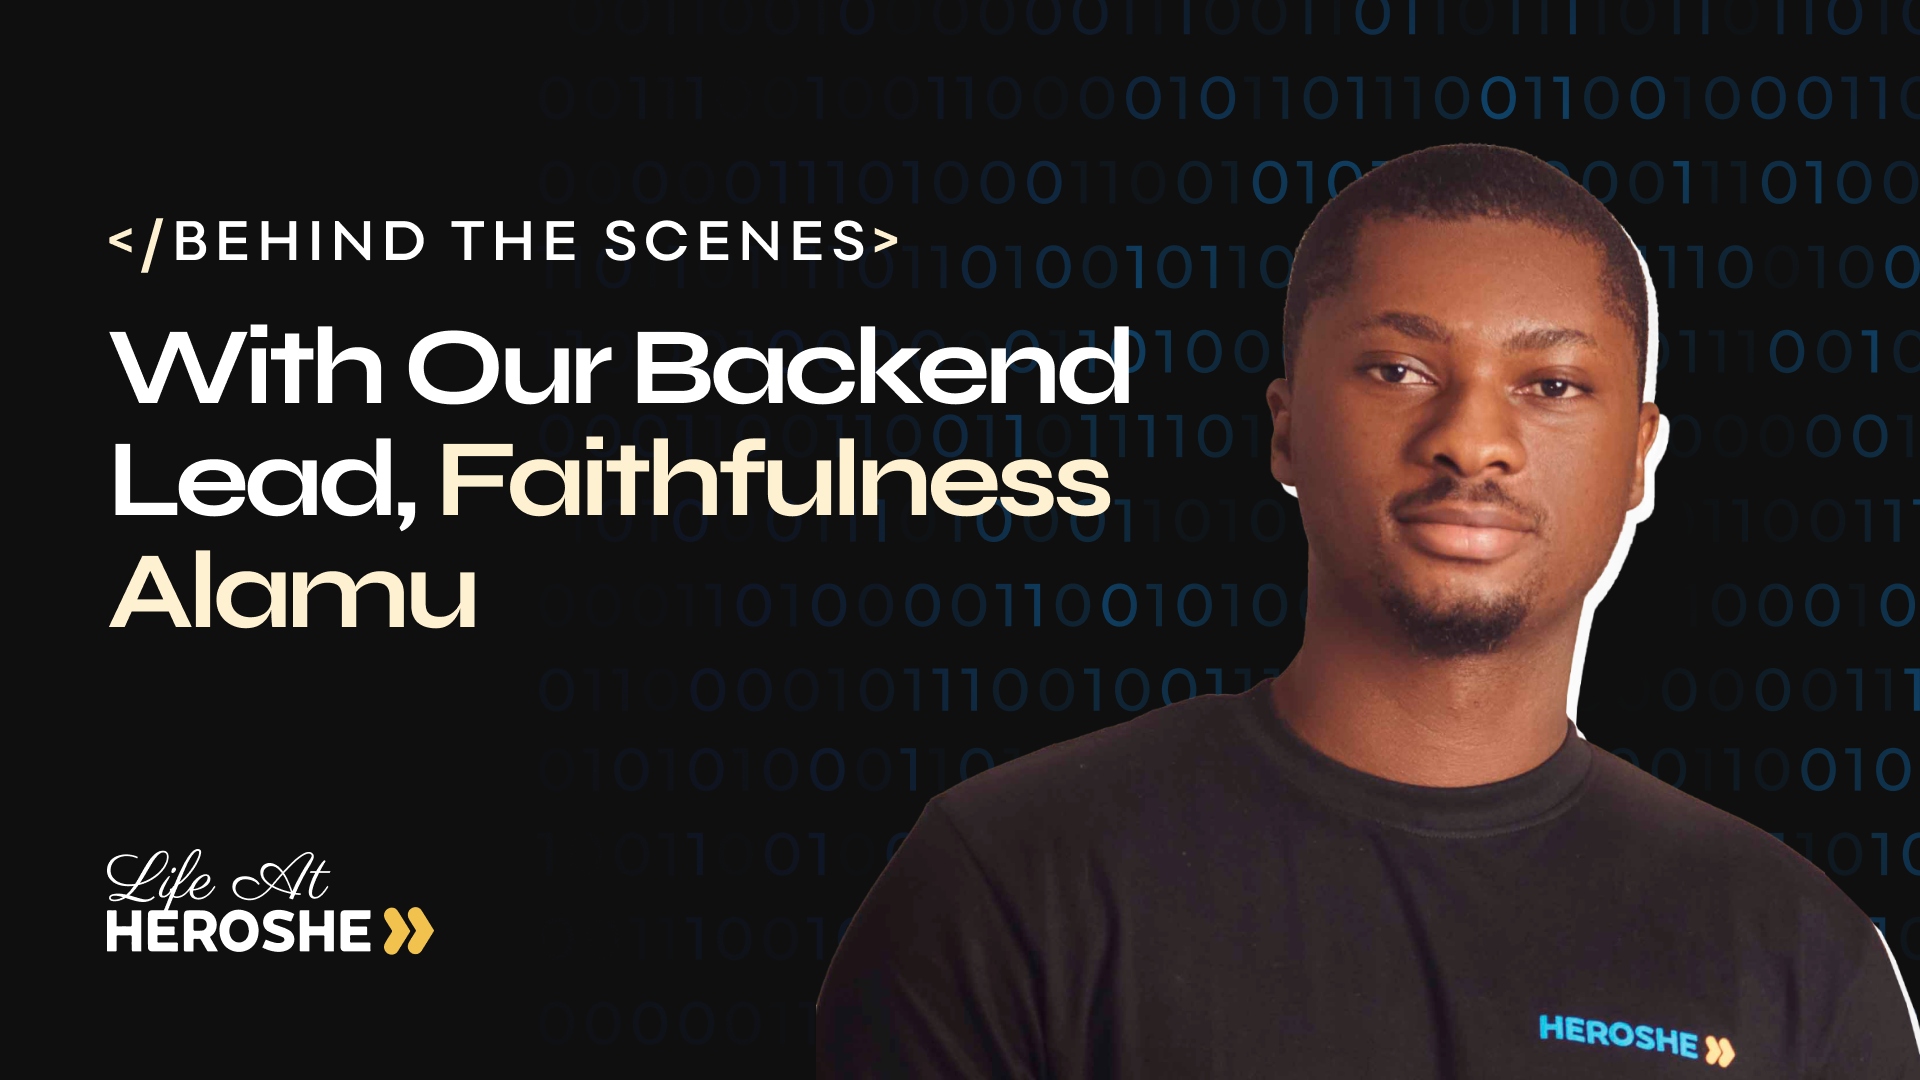 Life At Heroshe: Behind The Scenes With Our Backend Lead, Faithfulness Alamu